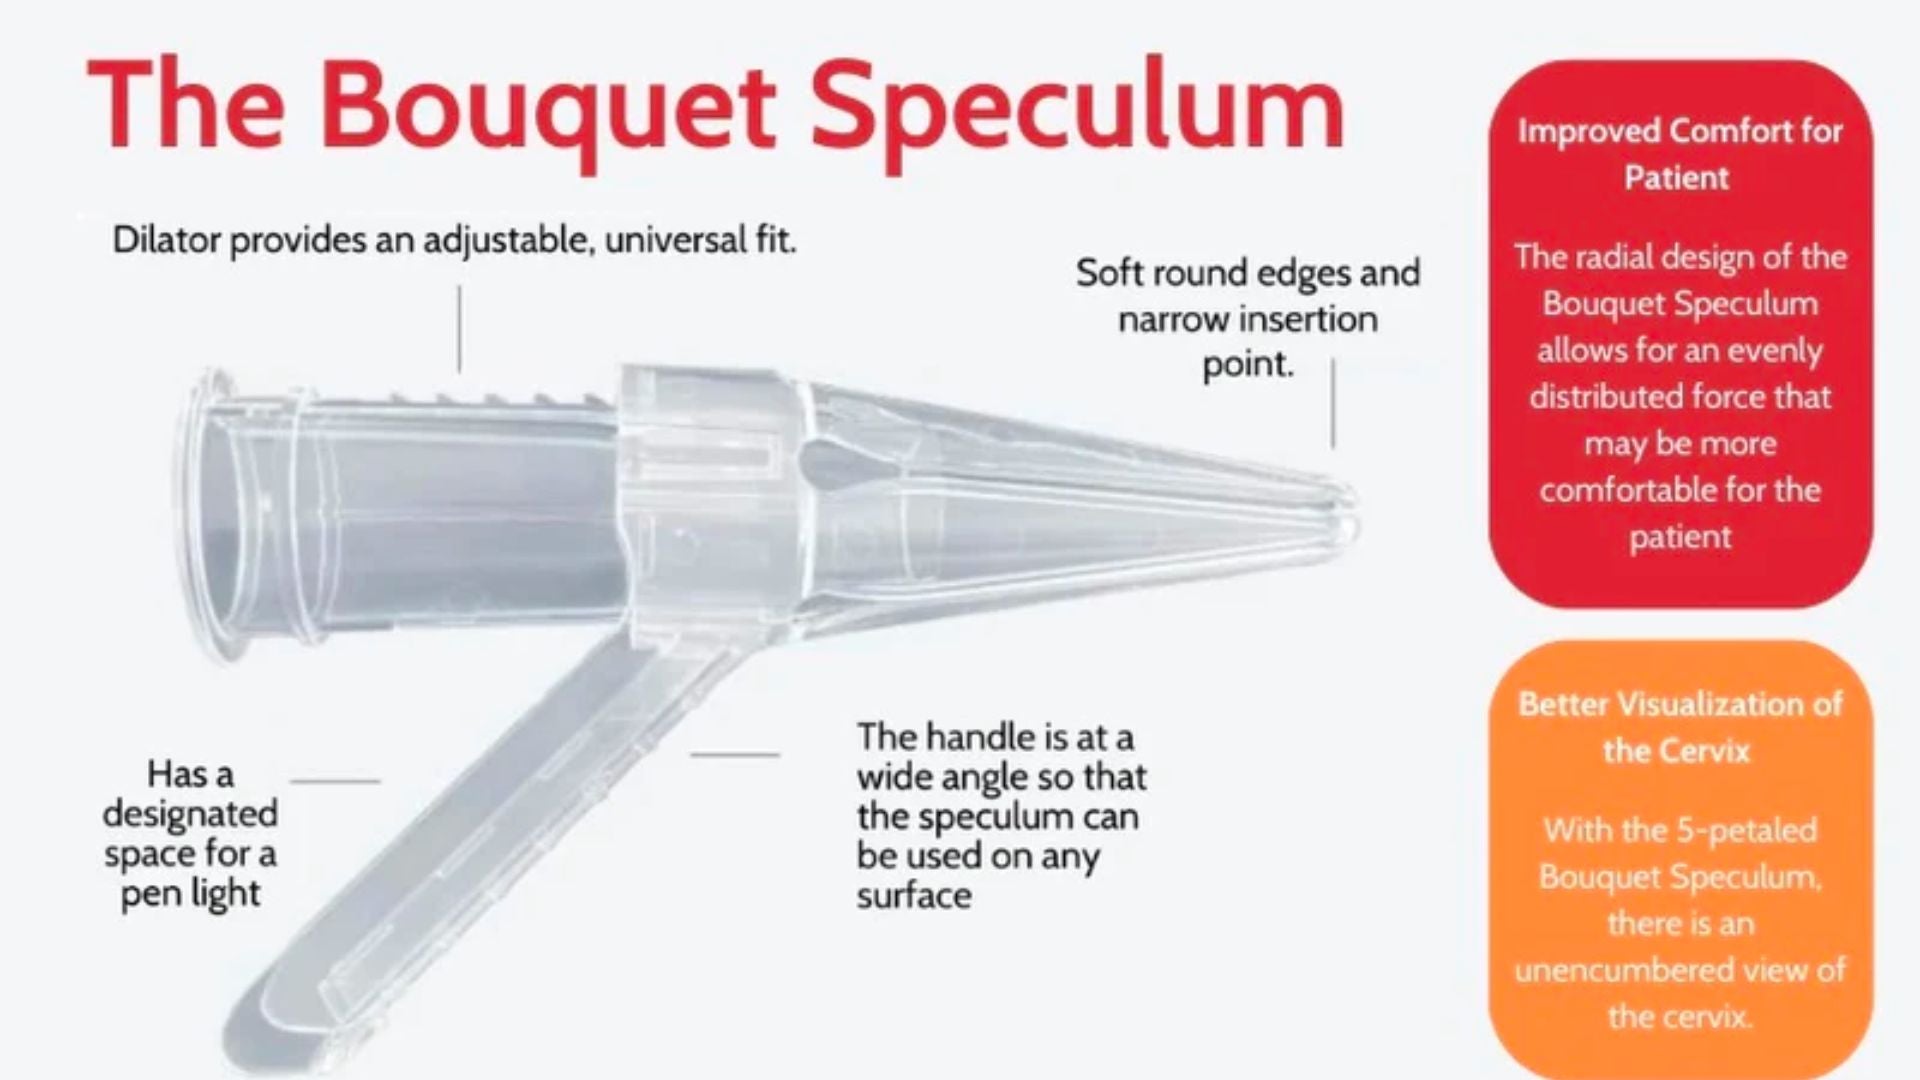 Our Clinic #7: The Founding of the Bouquet Speculum